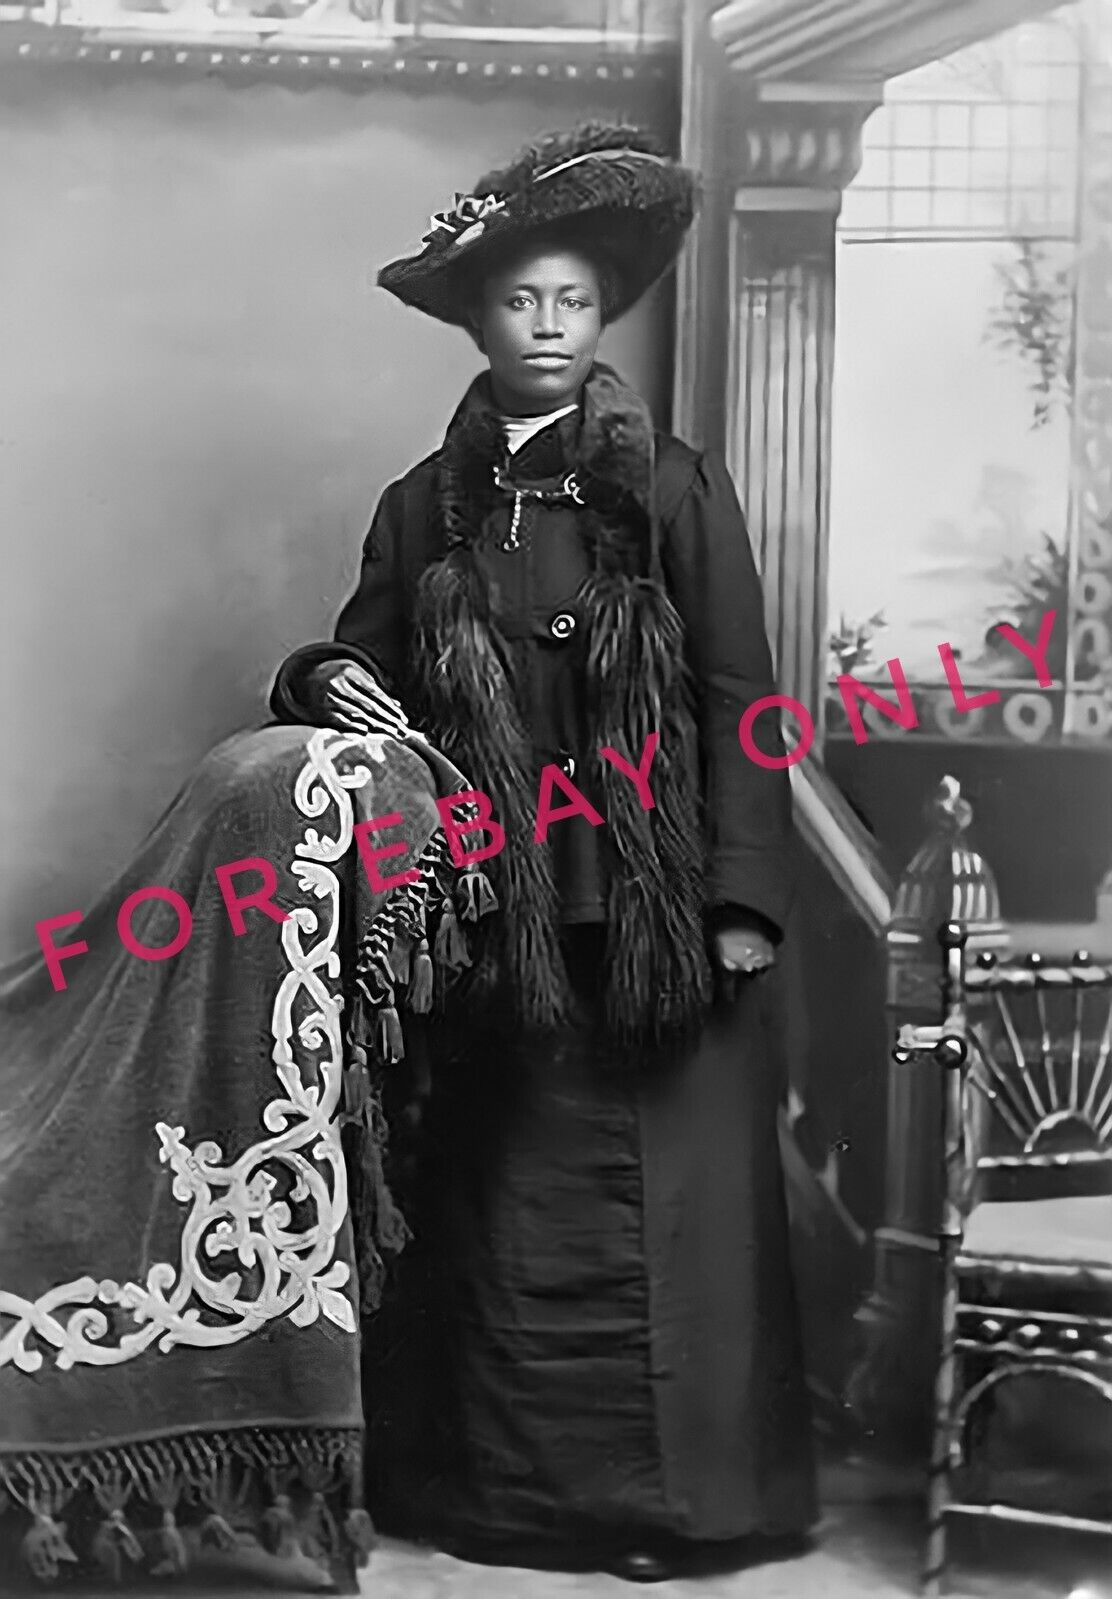 Vintage Old 1880's Photo reprint of Victorian era African American Black Woman